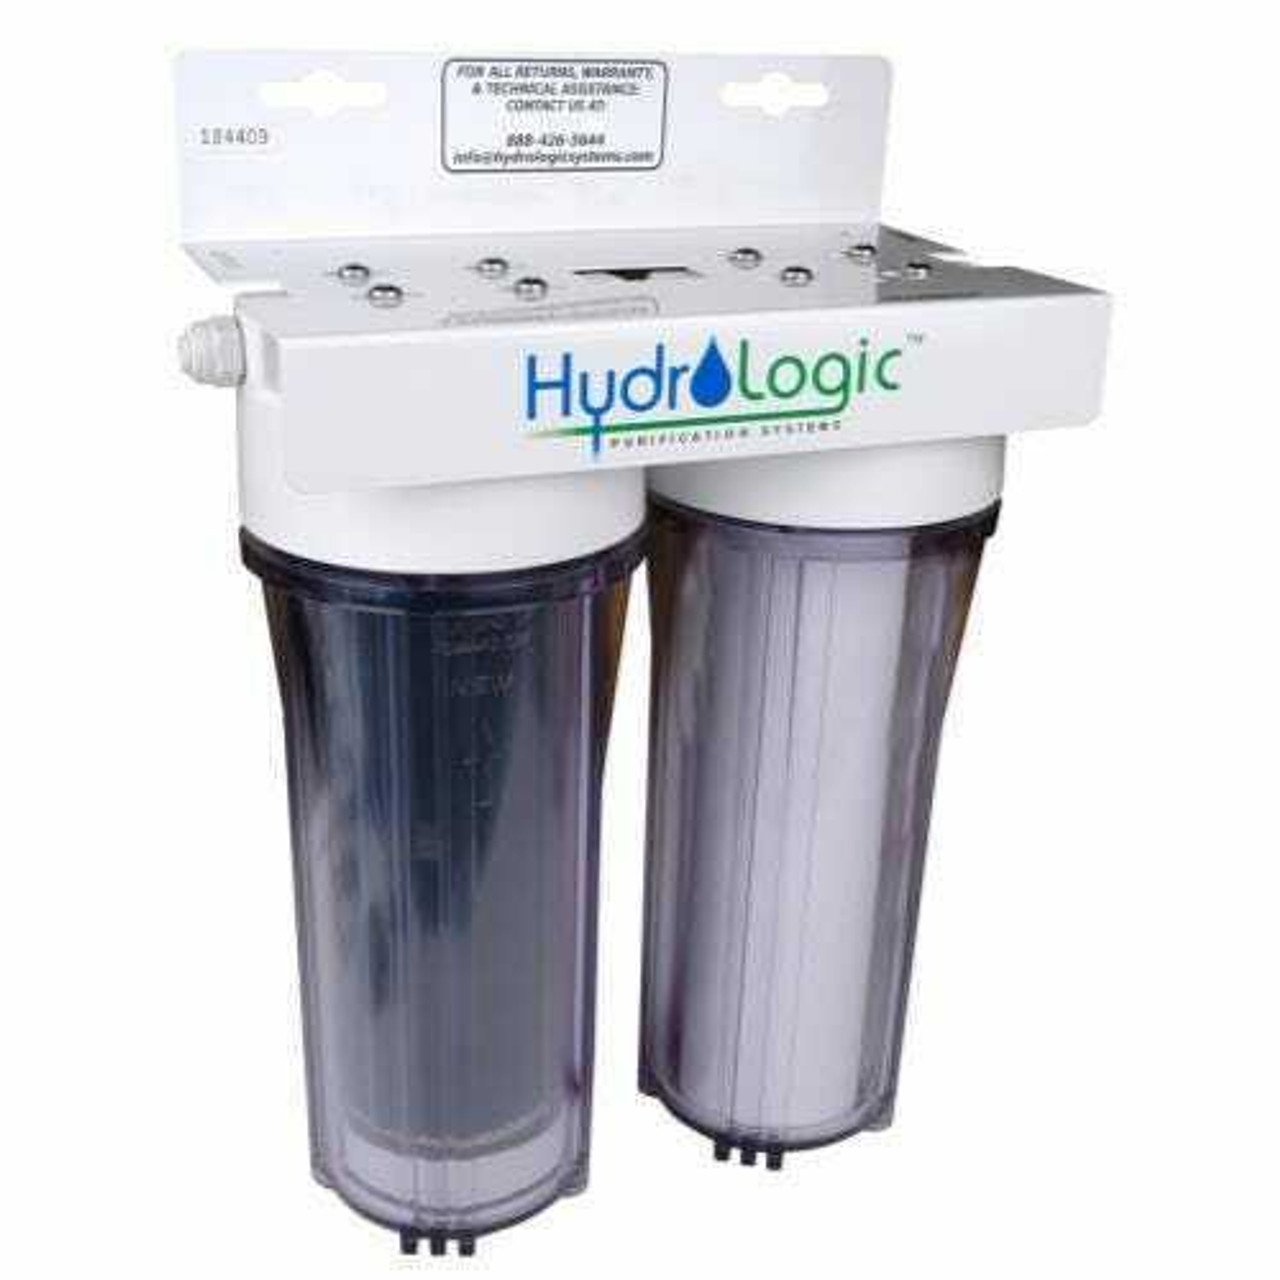 Hydro-Logic Small Boy w/ KDF85 Catalytic Carbon Filter - 1